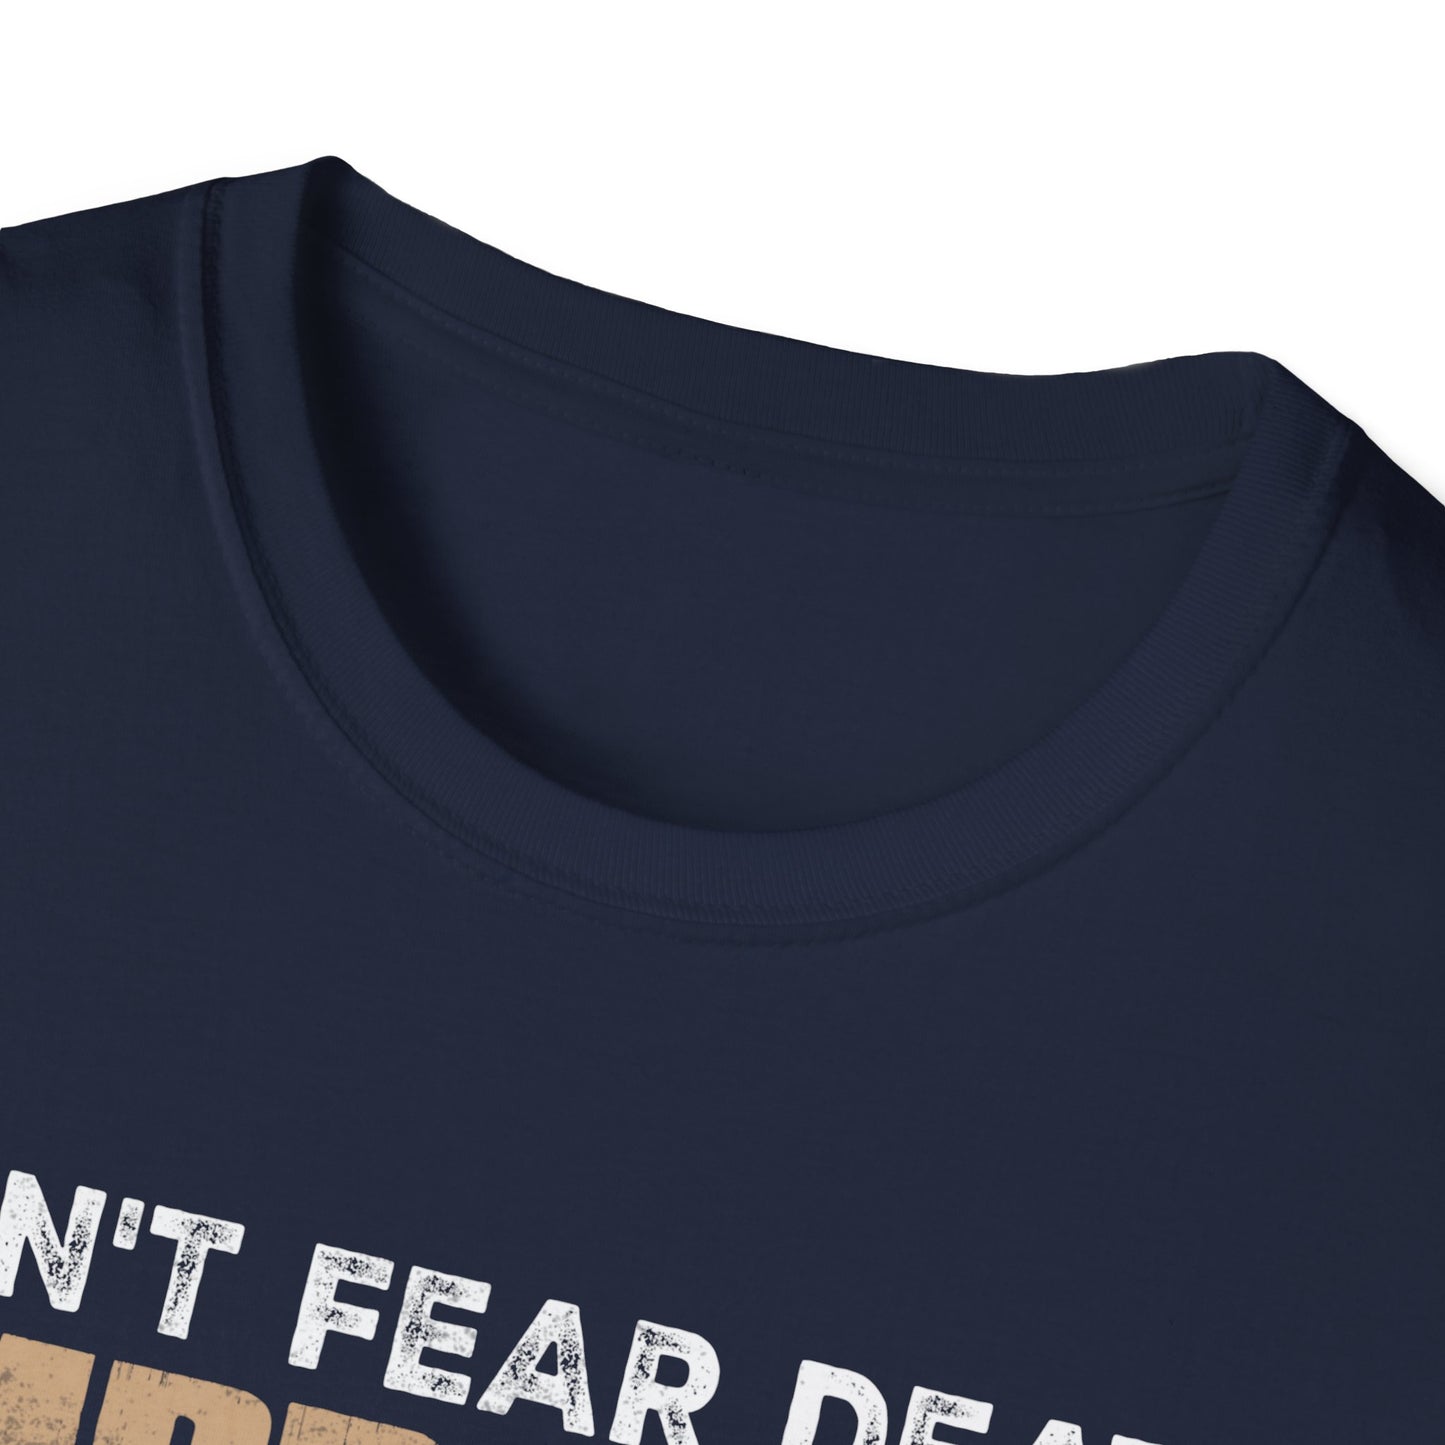 Don't Fear Death Embrace It If It Comes As If You Are Lying Down Next To A Beautiful Woman T-Shirt